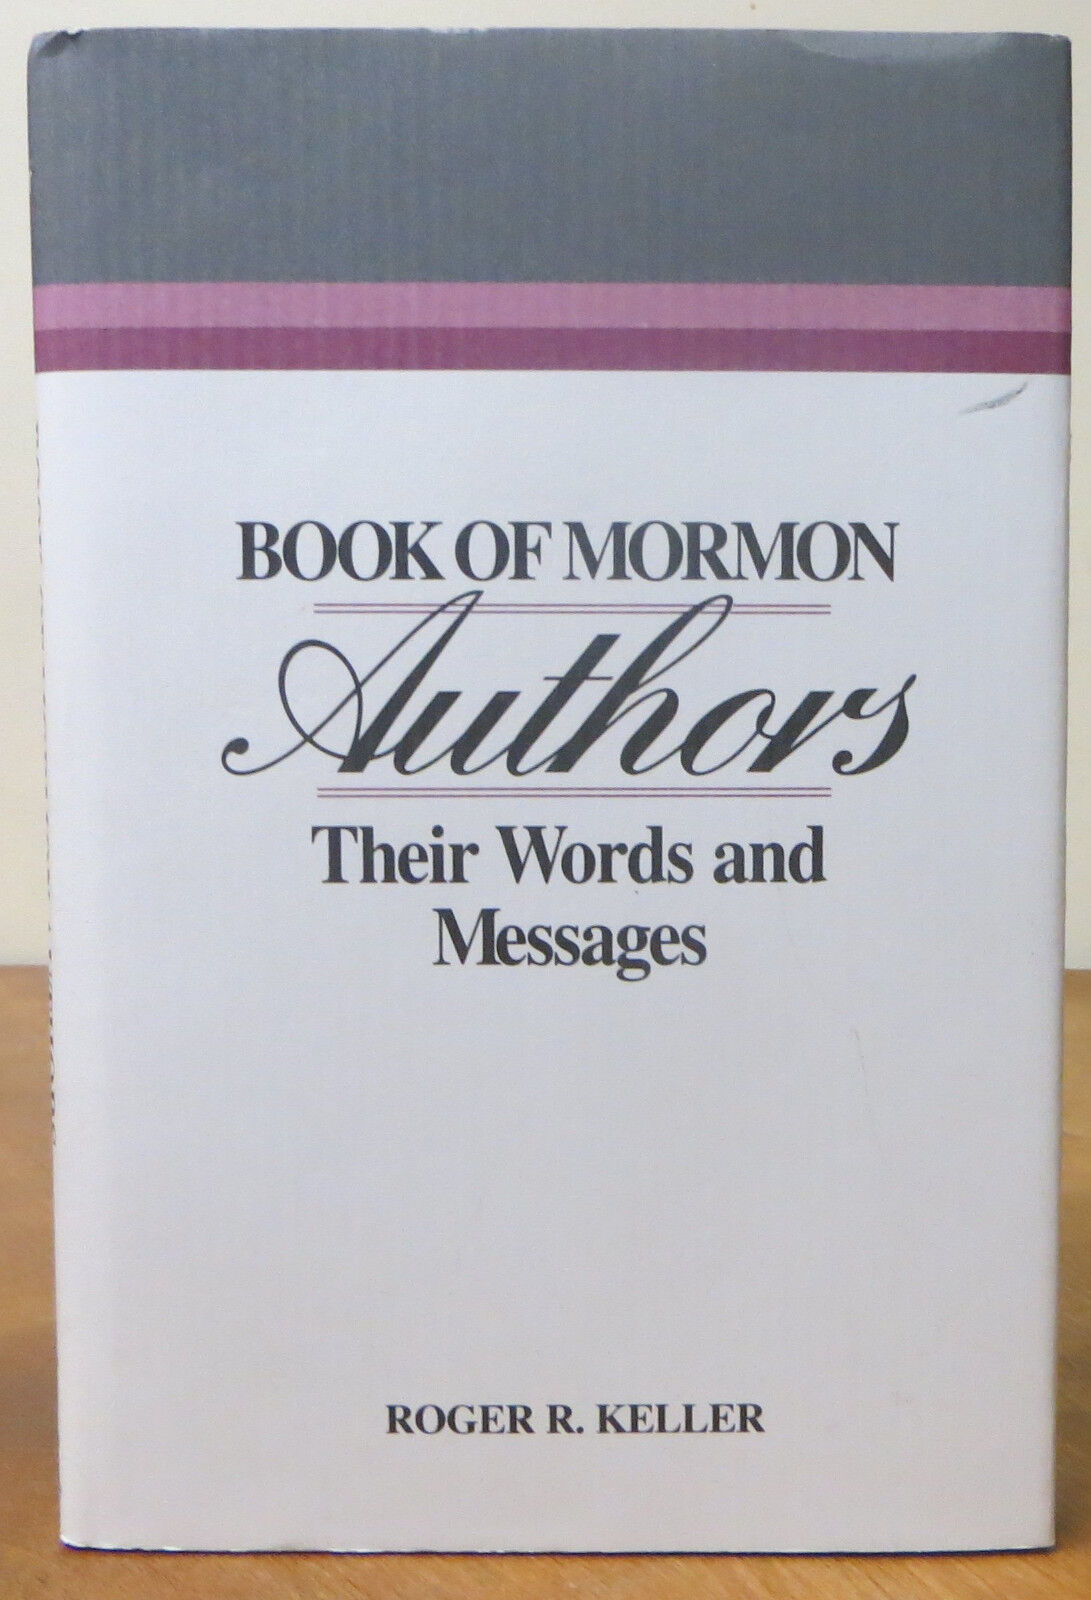 Book of mormon authors : their words and messages (1996, hardcover)